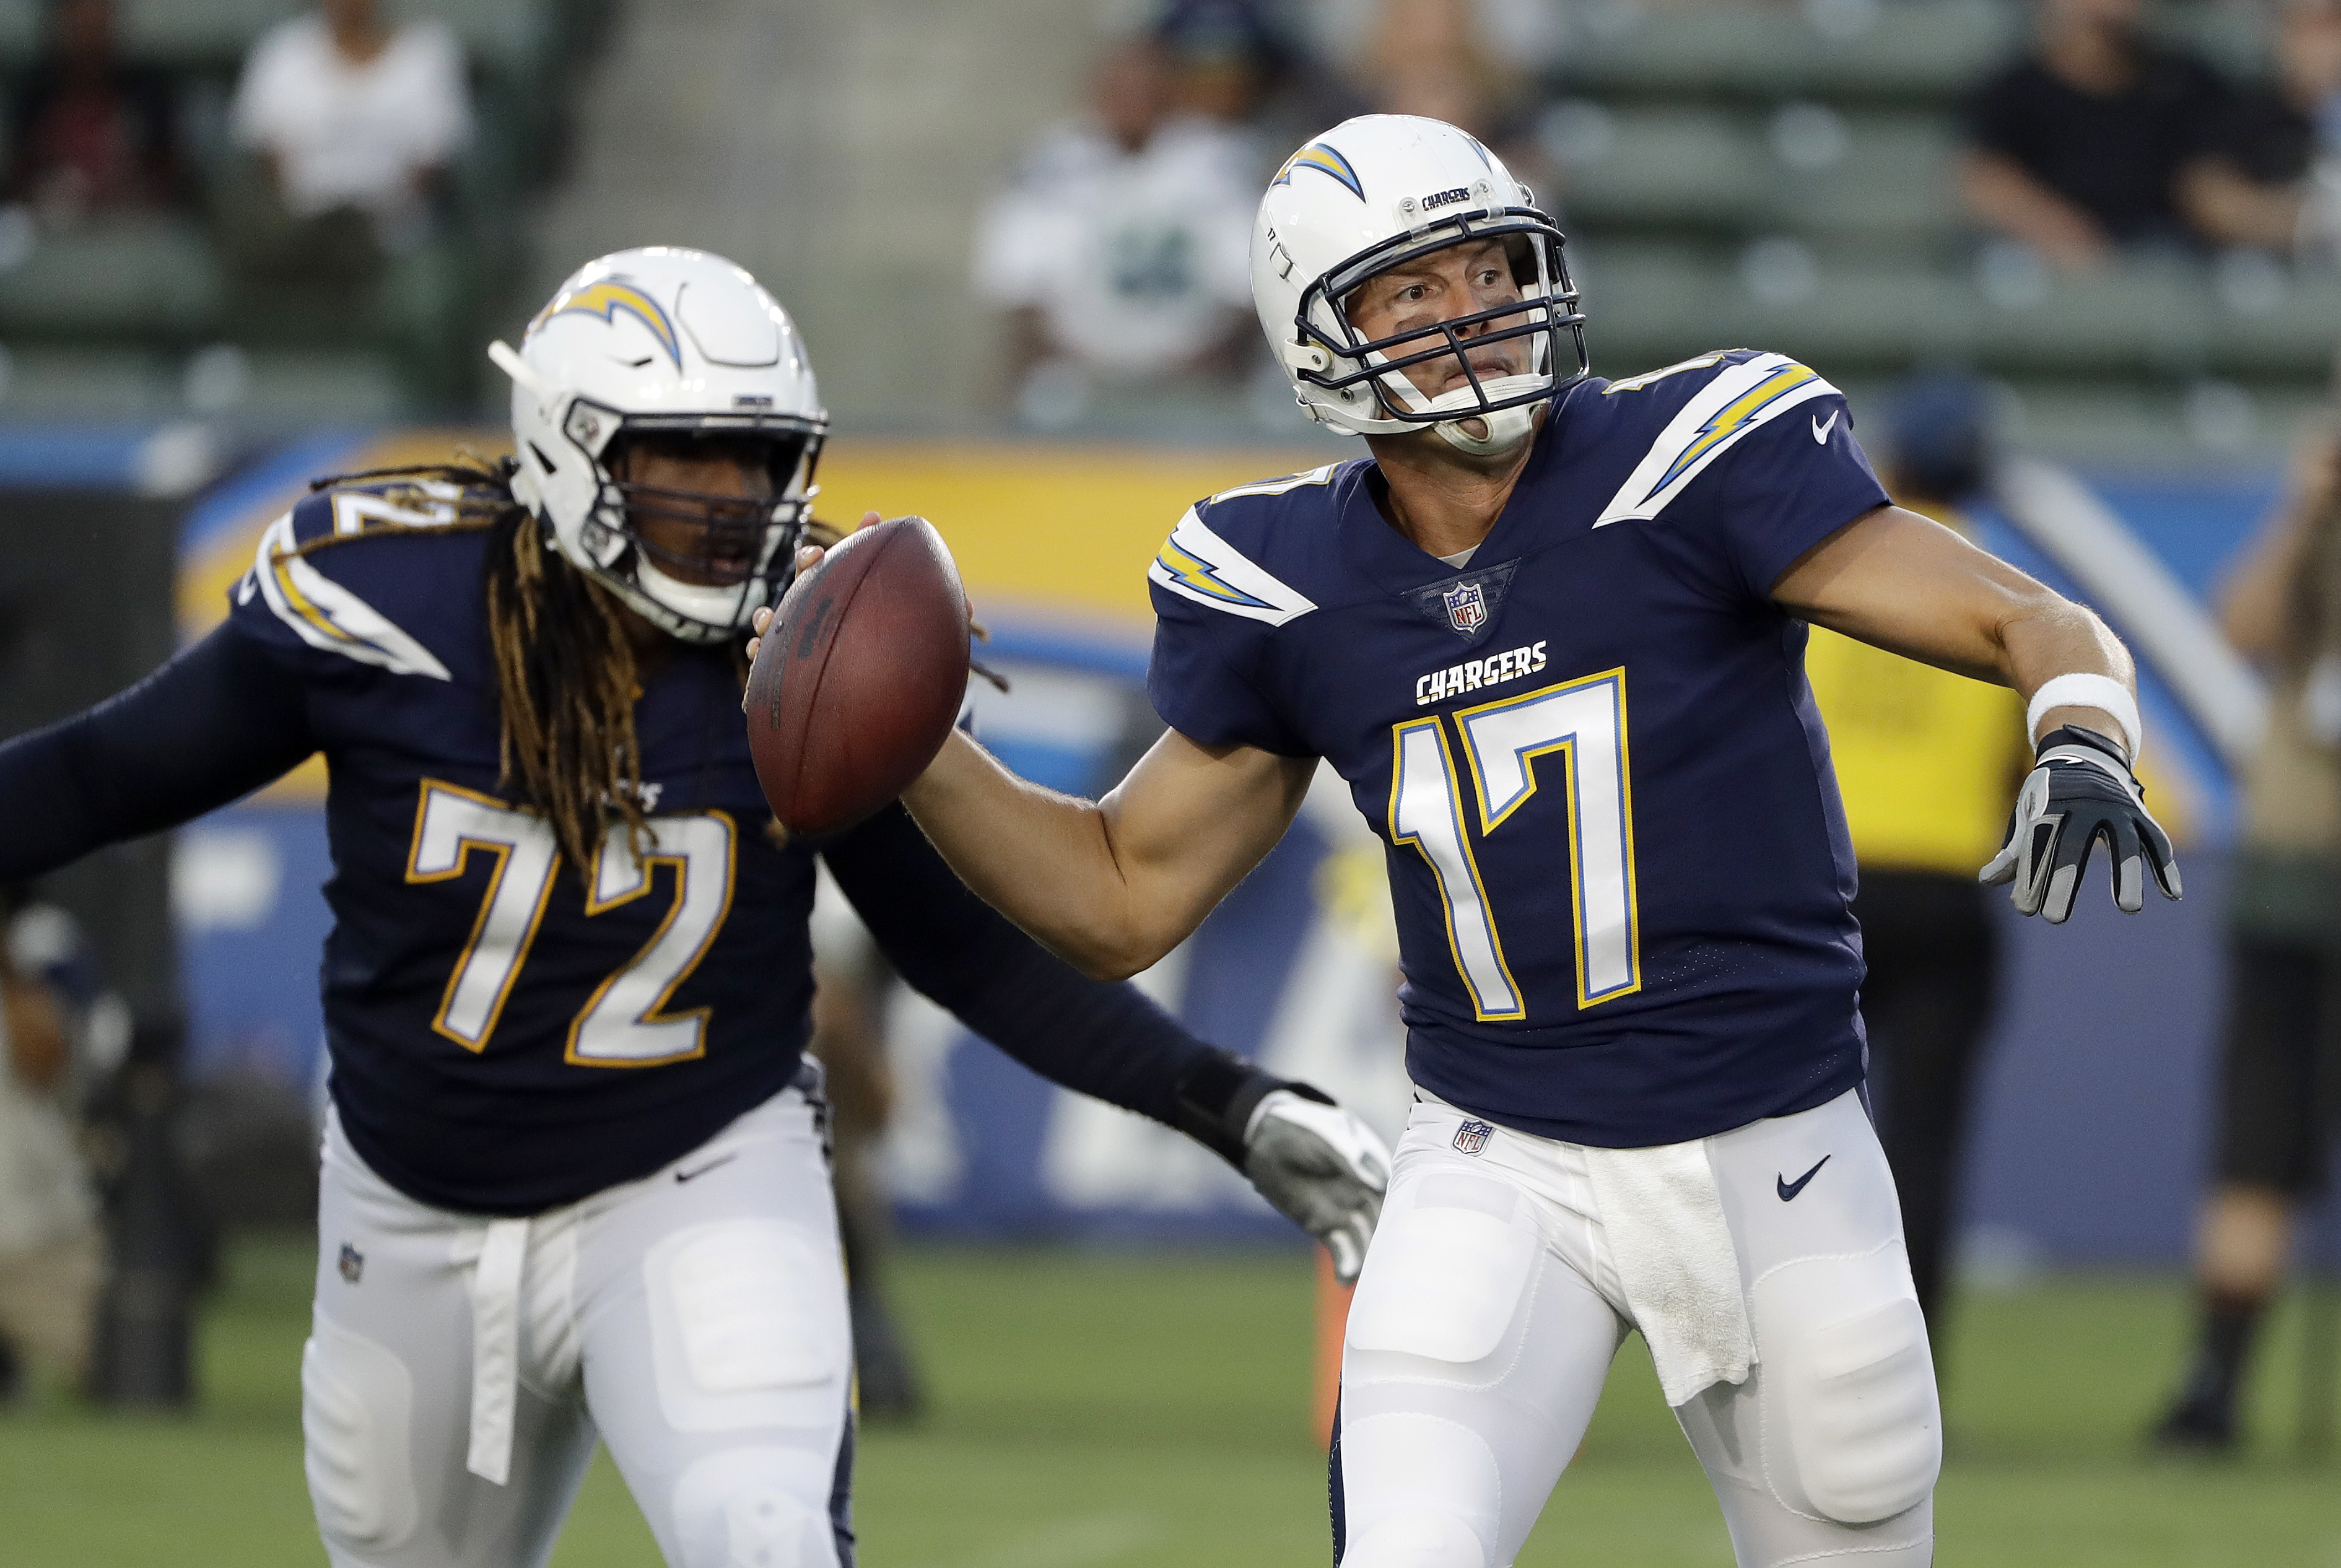 Rivers, Chargers look sharp early in 24-14 win over Seahawks